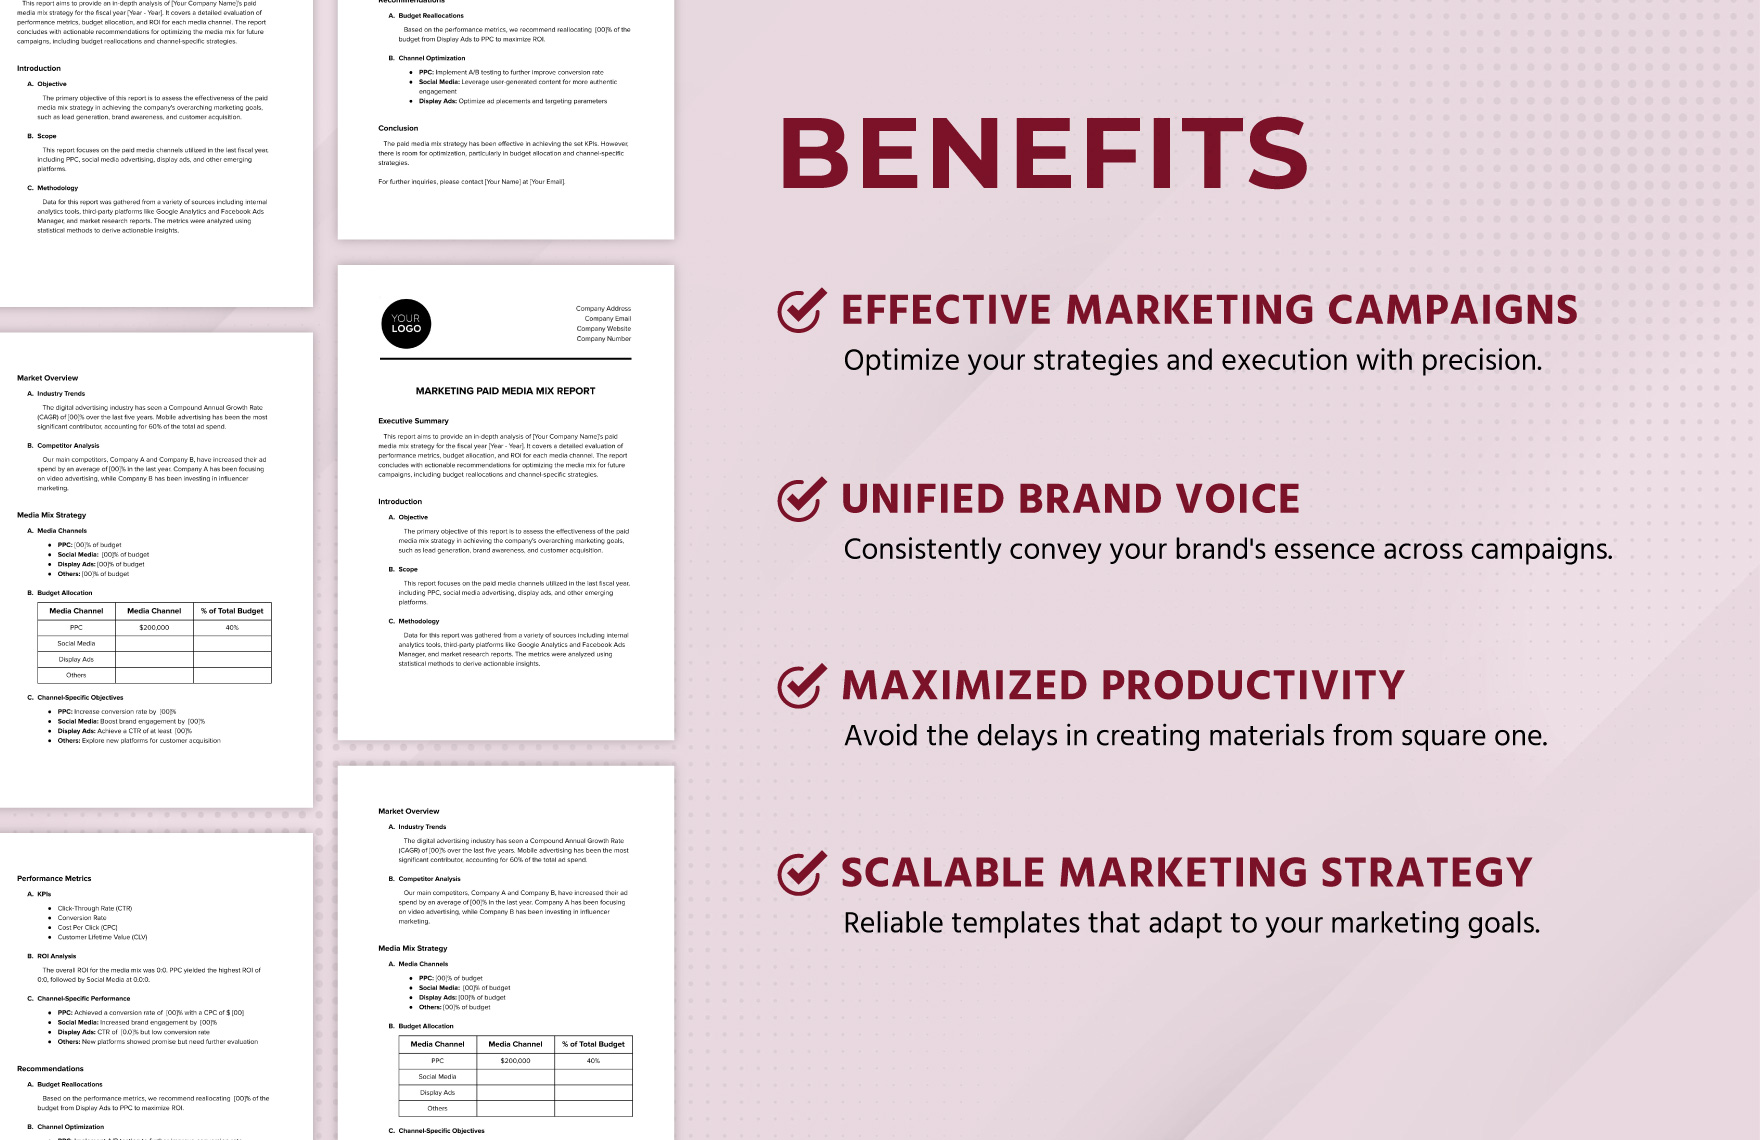 Marketing Paid Media Mix Report Template